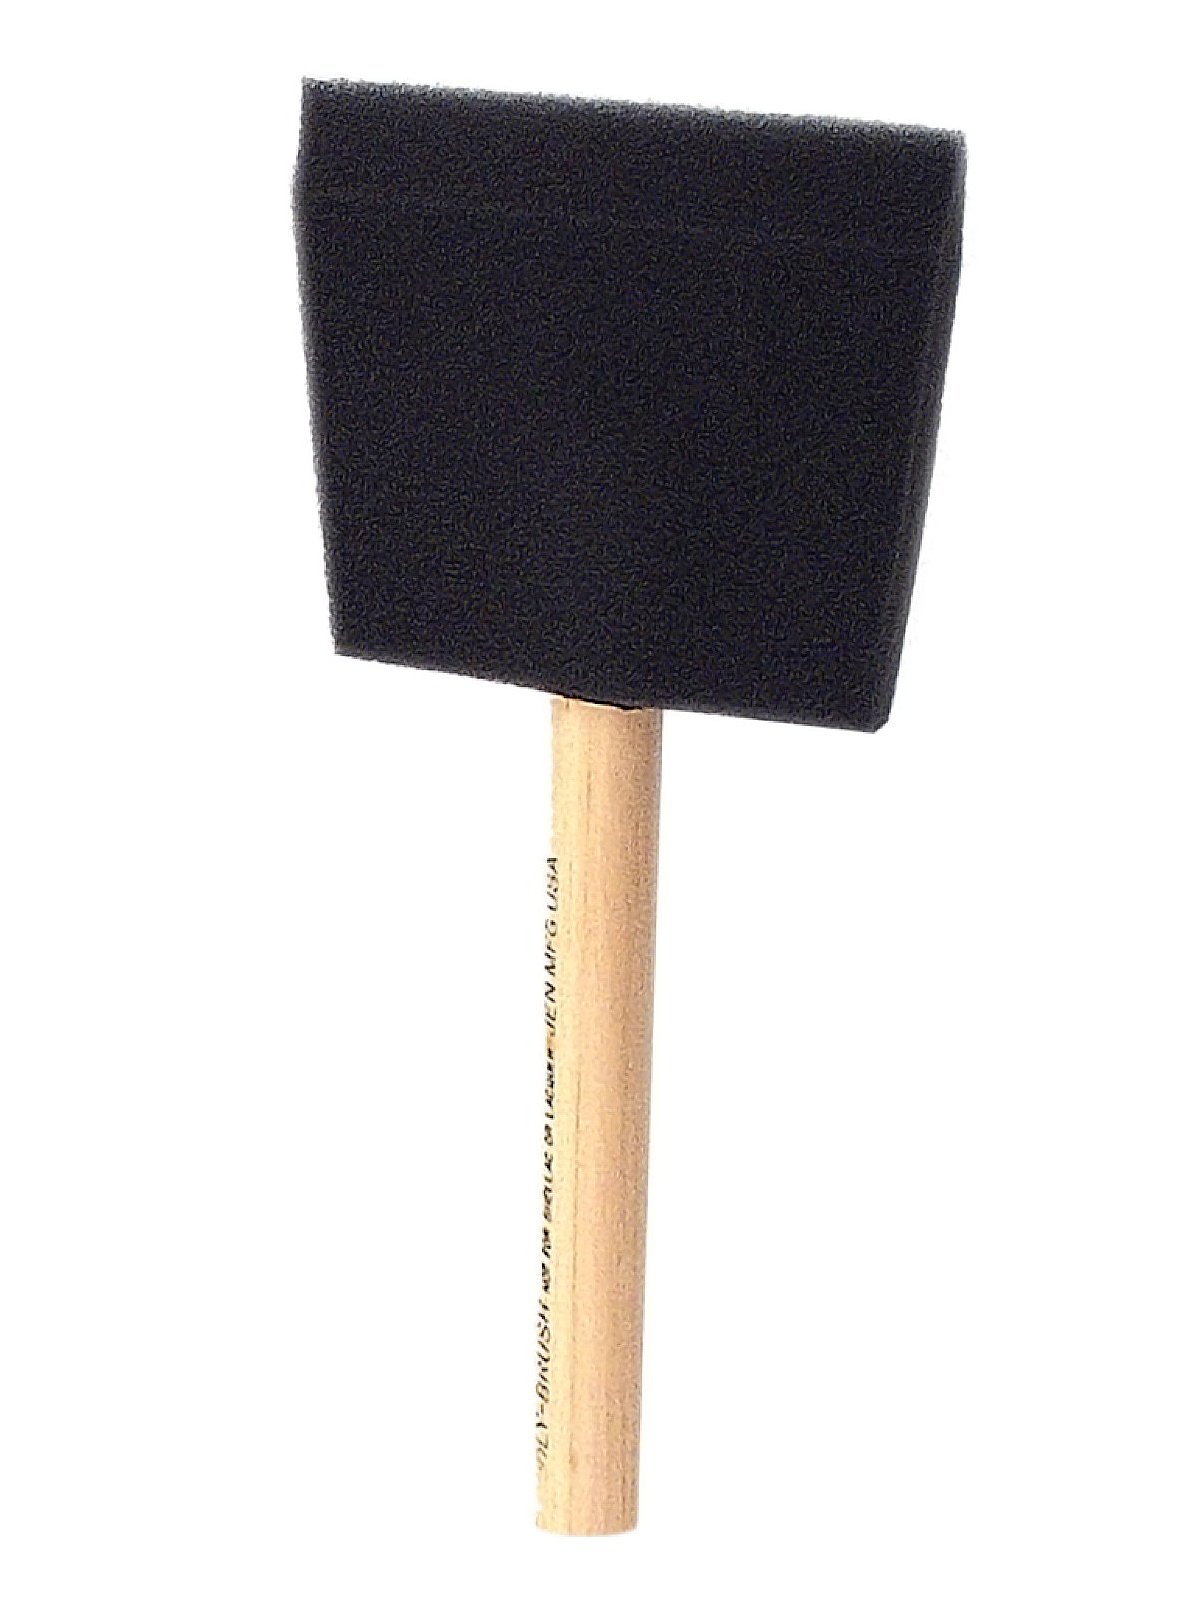 General Finishes Small Poly Foam Brush